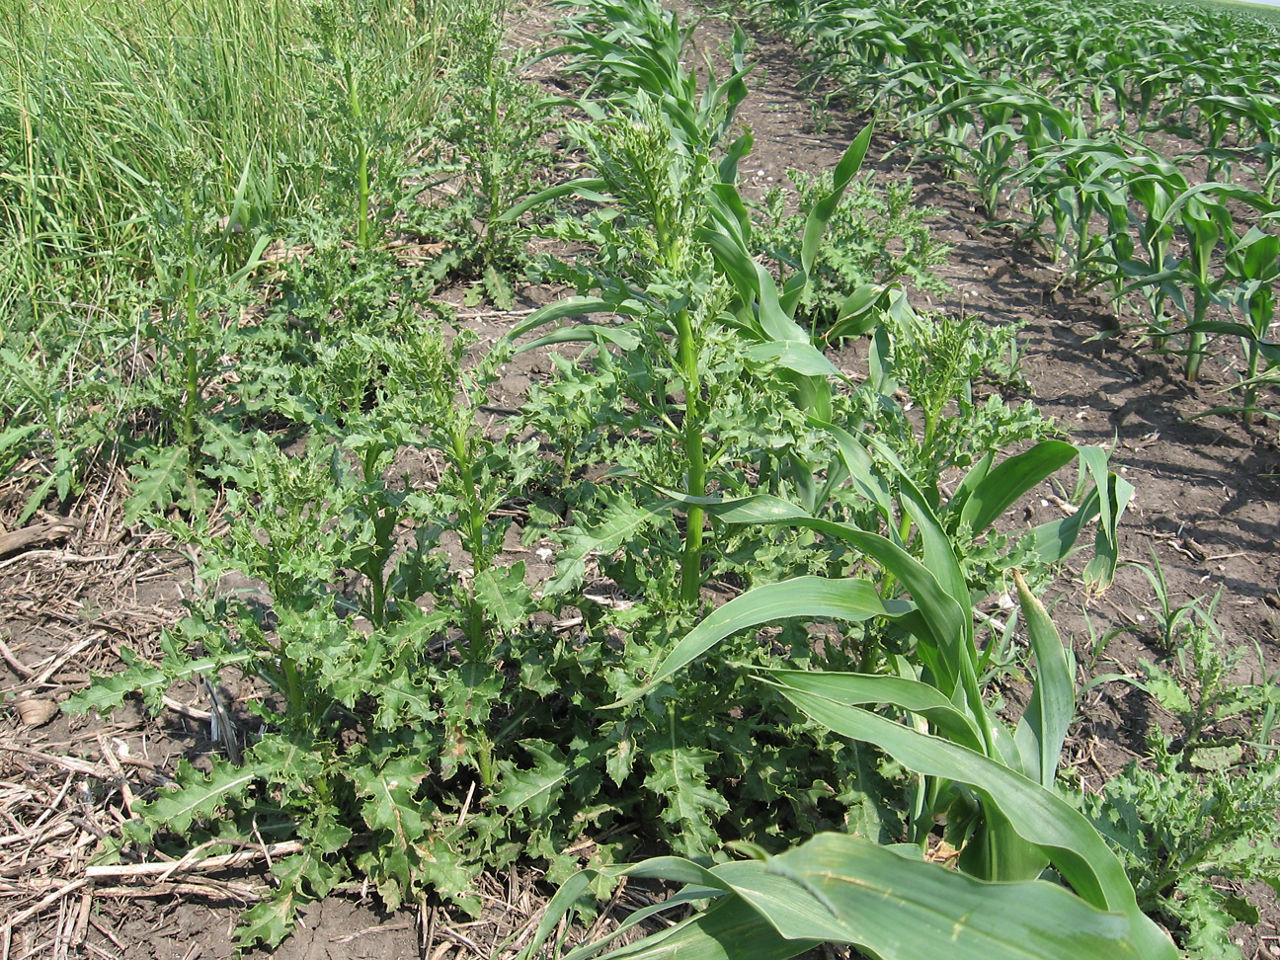 Weed - Canada Thistle in Field